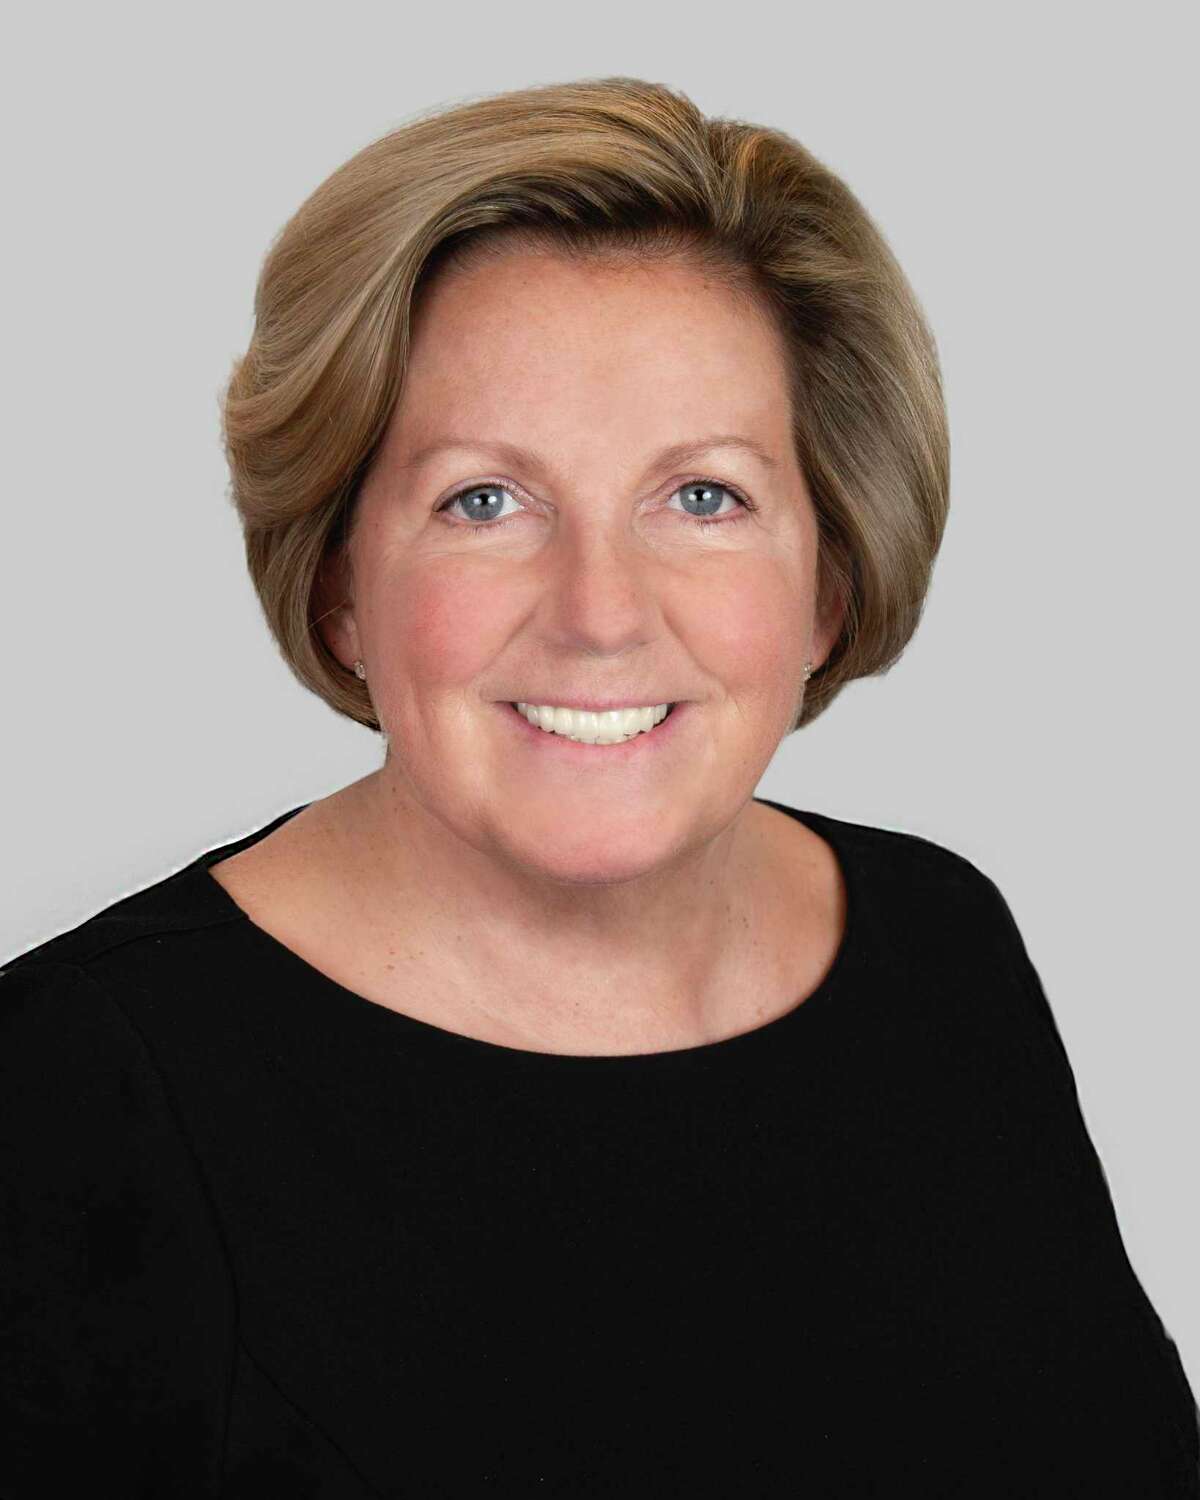 Maureen Coffey, the daughter of the founder of Latex Foam Products, predecessor to Shelton-based Talalay Global, has rejoined the company in the newly created position of director of international sales.